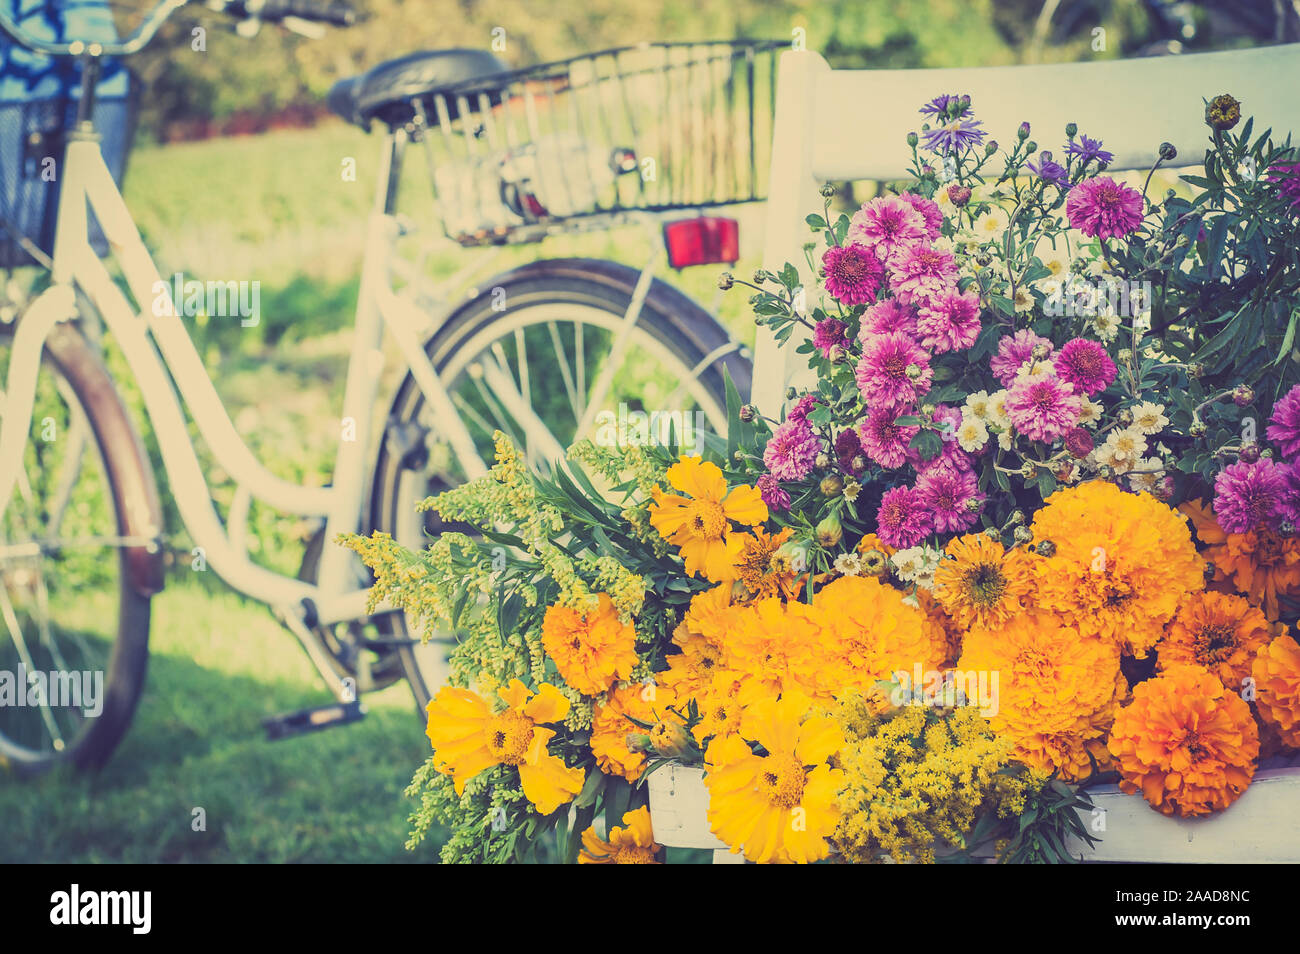 Bunch of autumn flowers on a white chair. Blurred retro bike in the background, vintage photo. Stock Photo